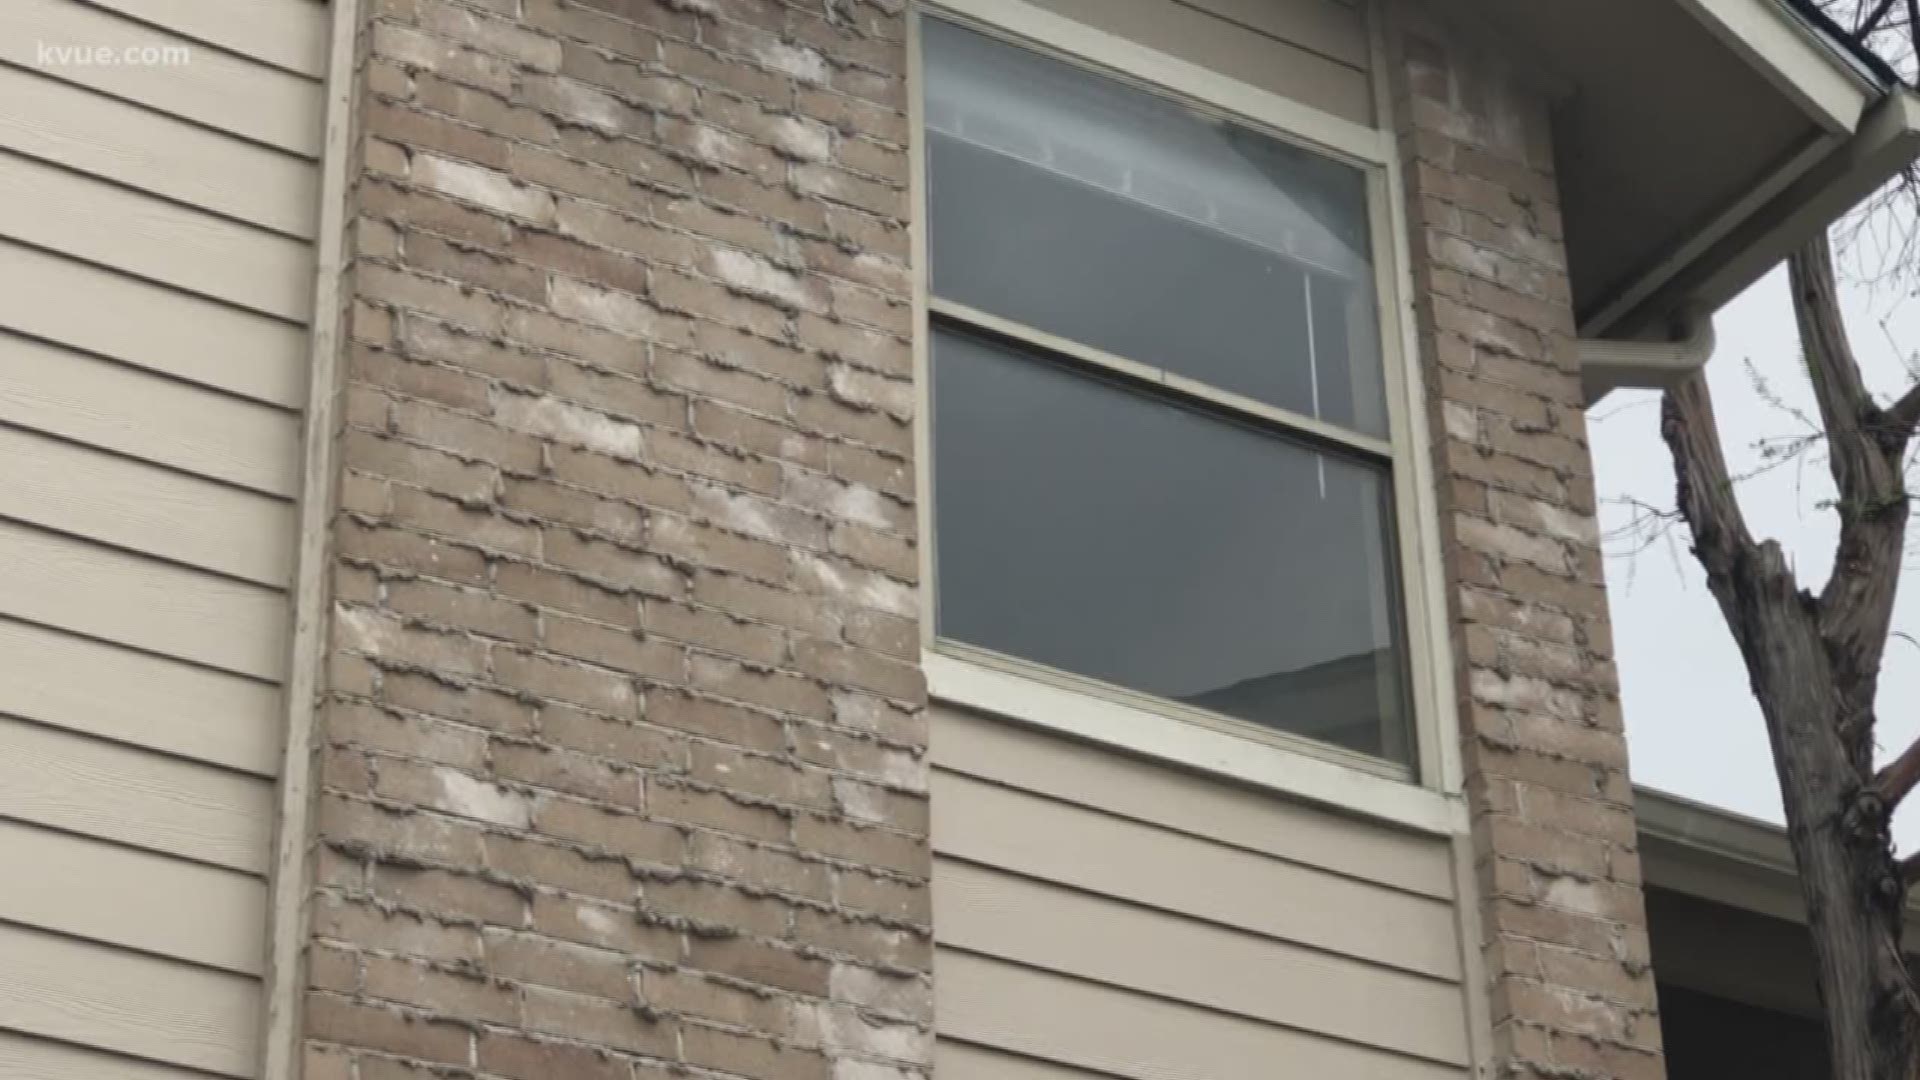 An Austin father is accused of throwing his two year old child out a third story window.. 20 feet to the ground.